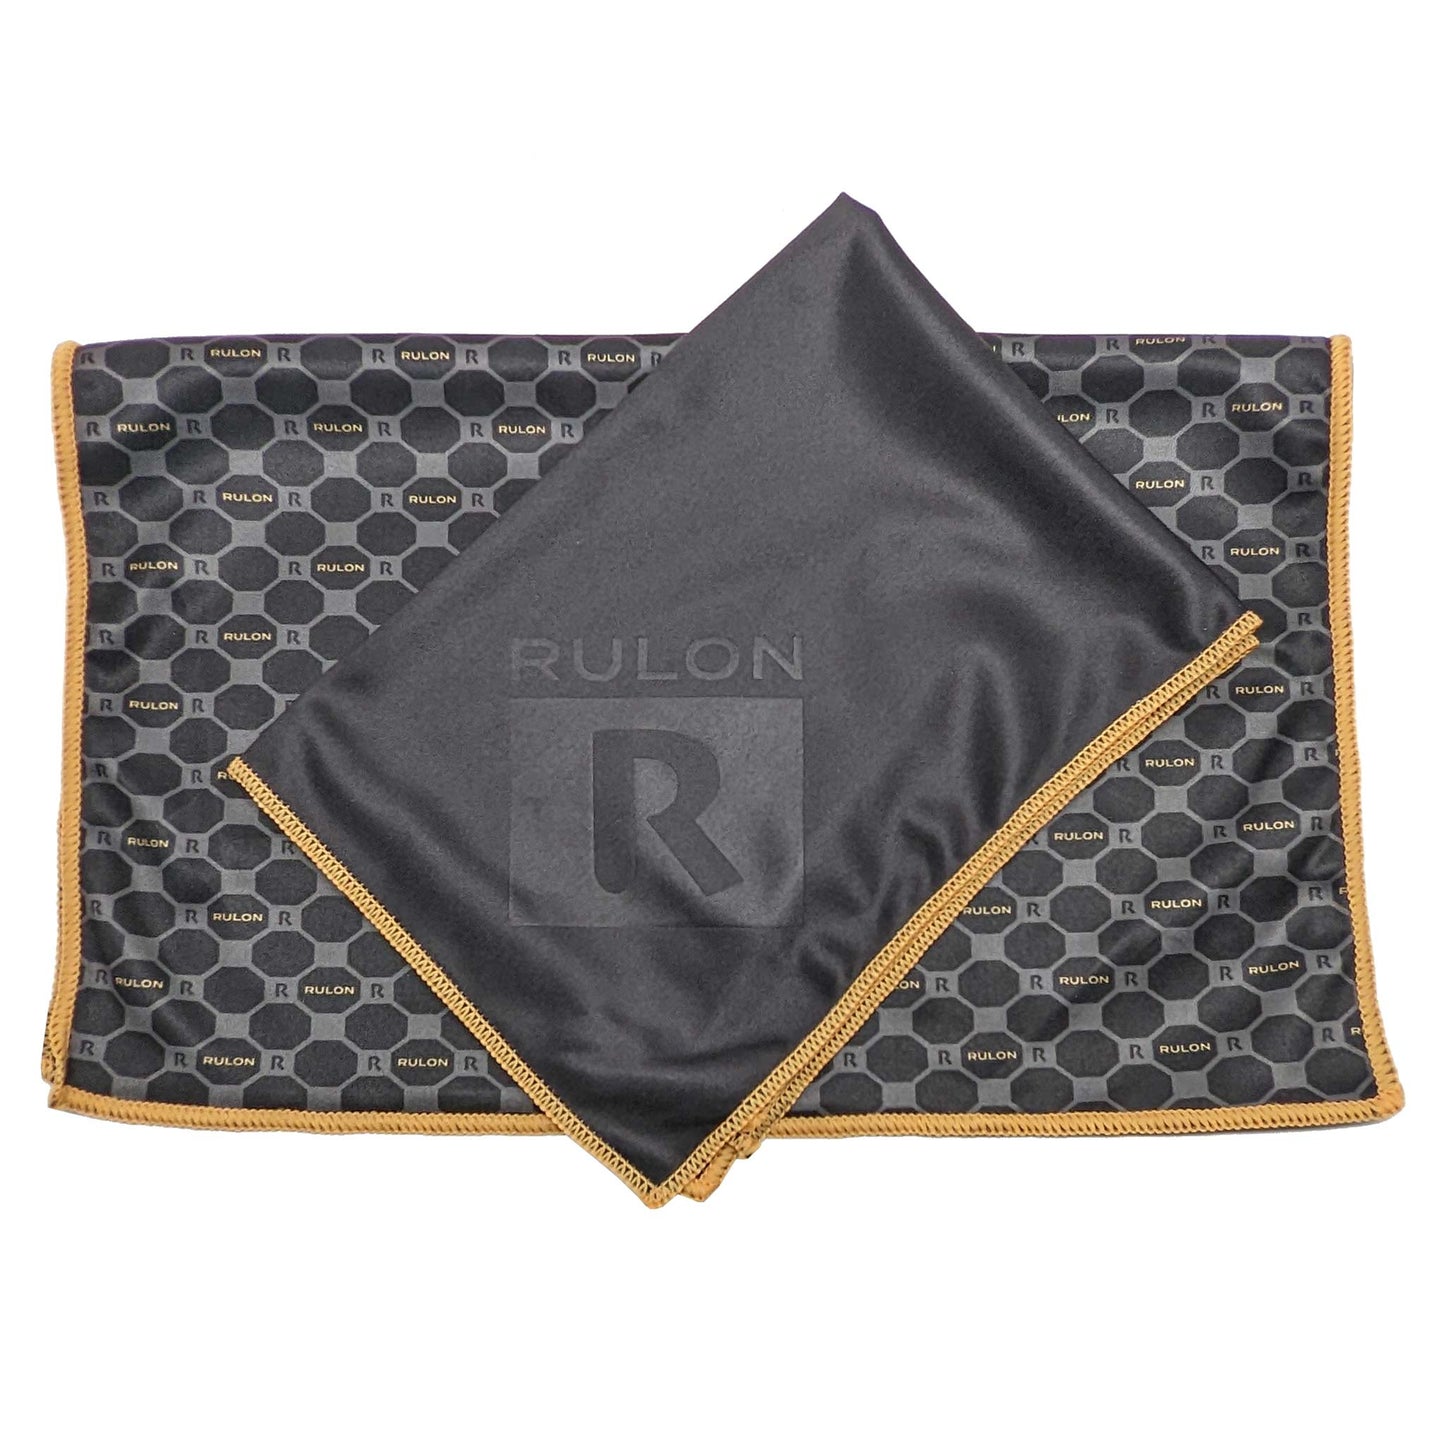 RULON Musical Instrument Cleaning Cloth - Octo Grid Pattern